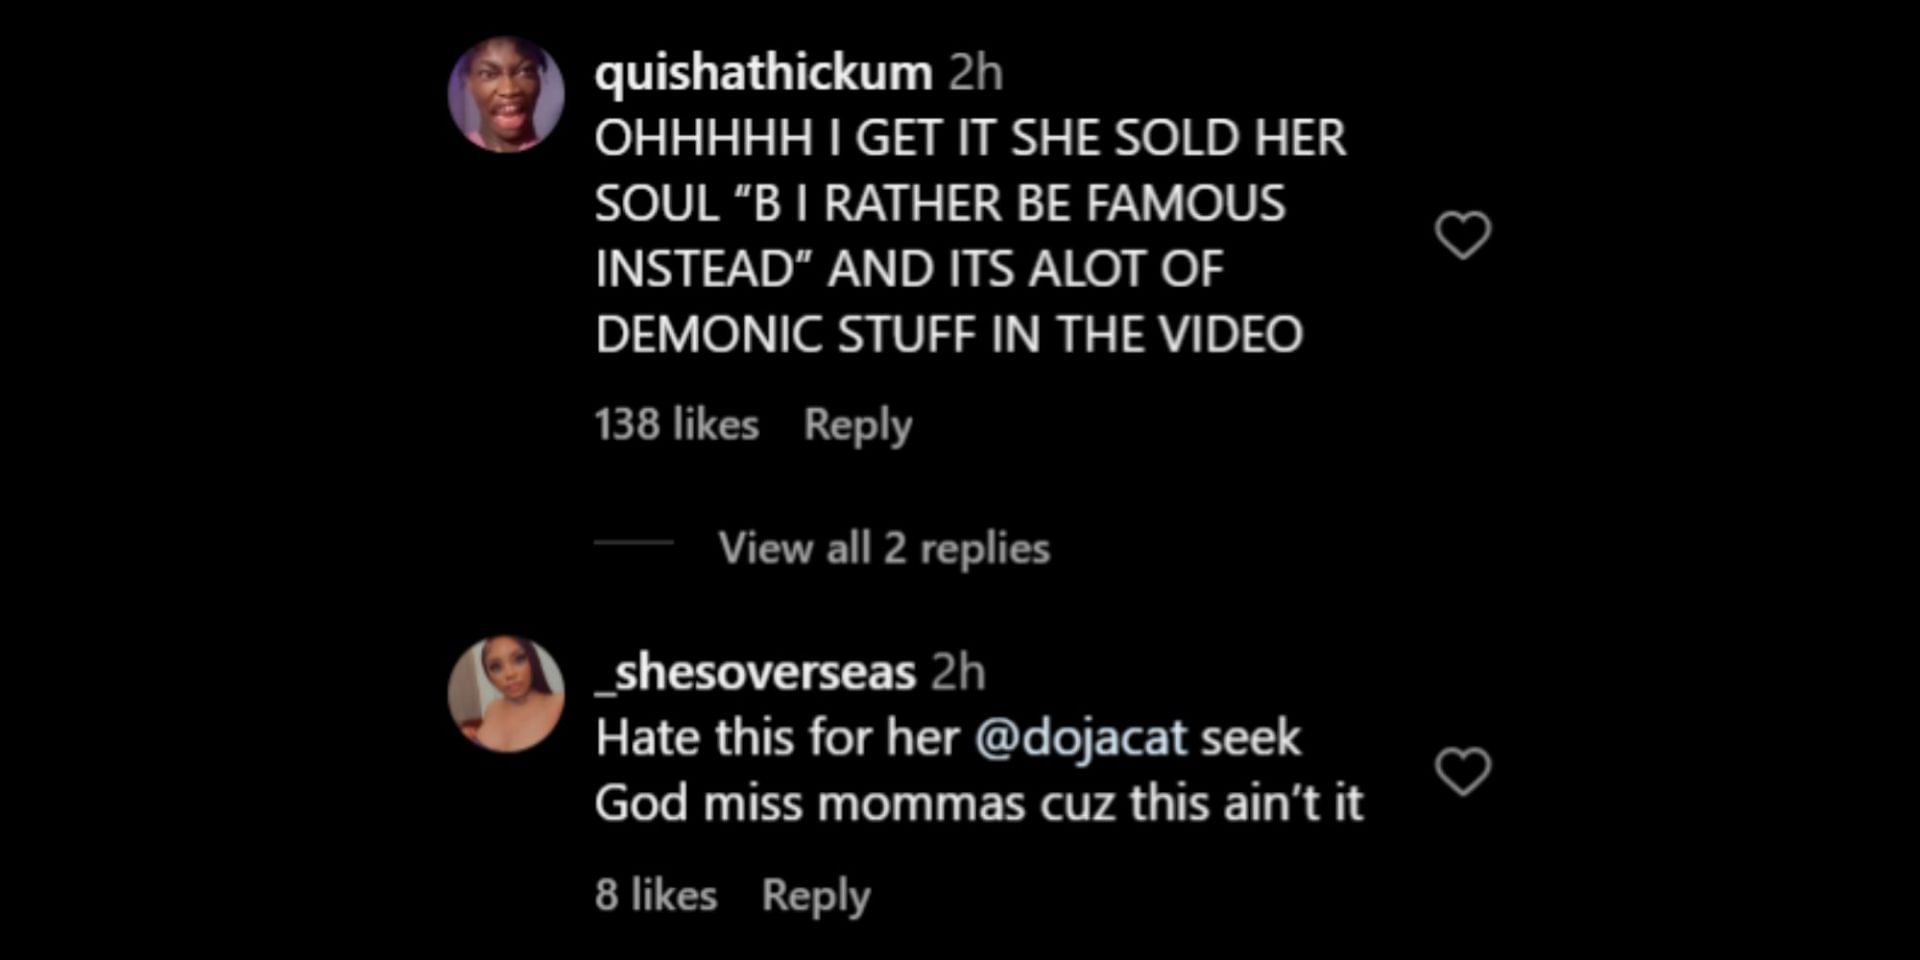 Some viewers criticized Doja Cat for portraying demonic imageries in &quot;Paint The Town Red&quot; mv. (Image via Instagram/@theneighborhoodtalk)